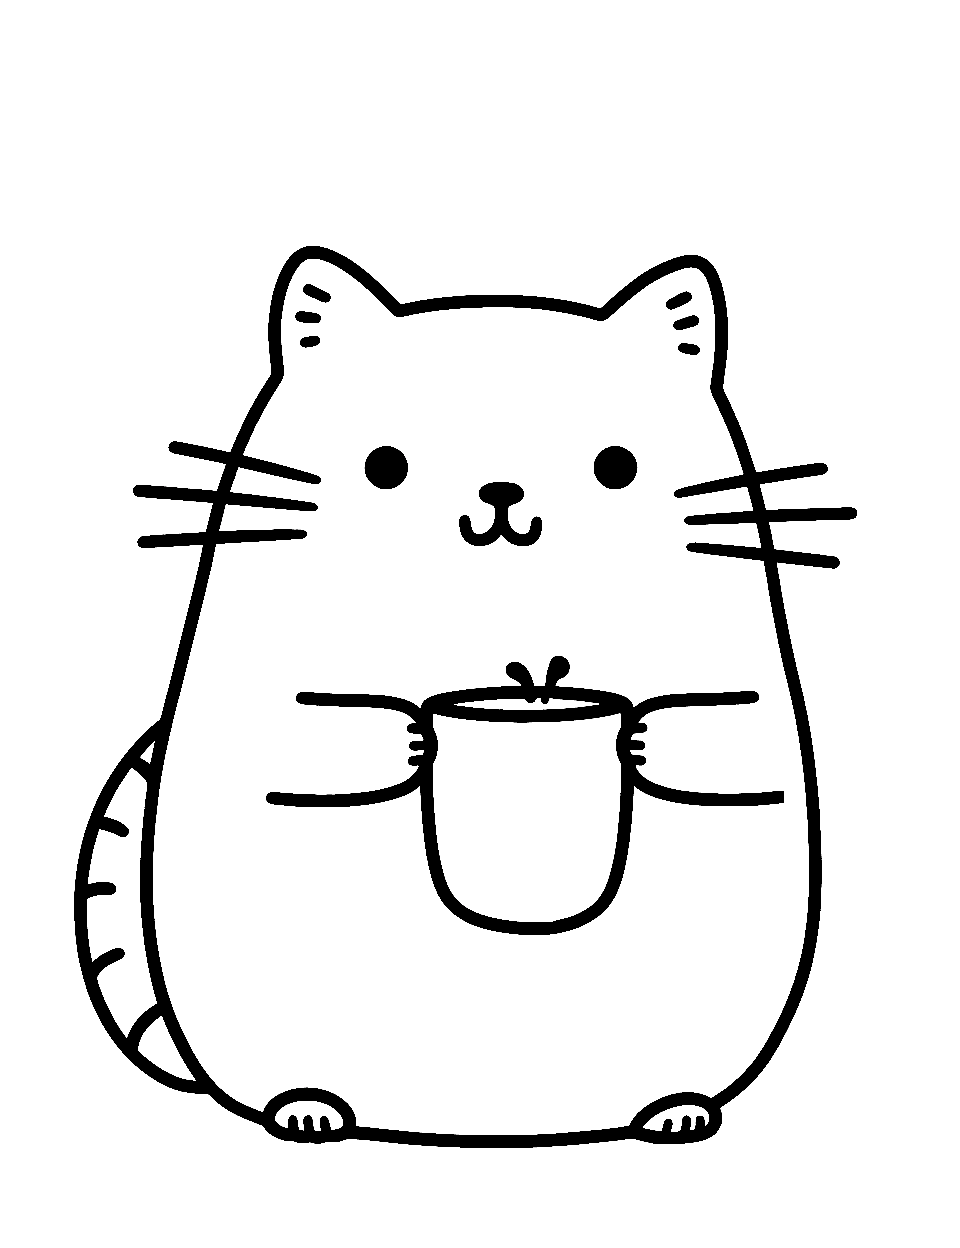 Morning Coffee Coloring Page - Pusheen holding a warm cup of coffee.